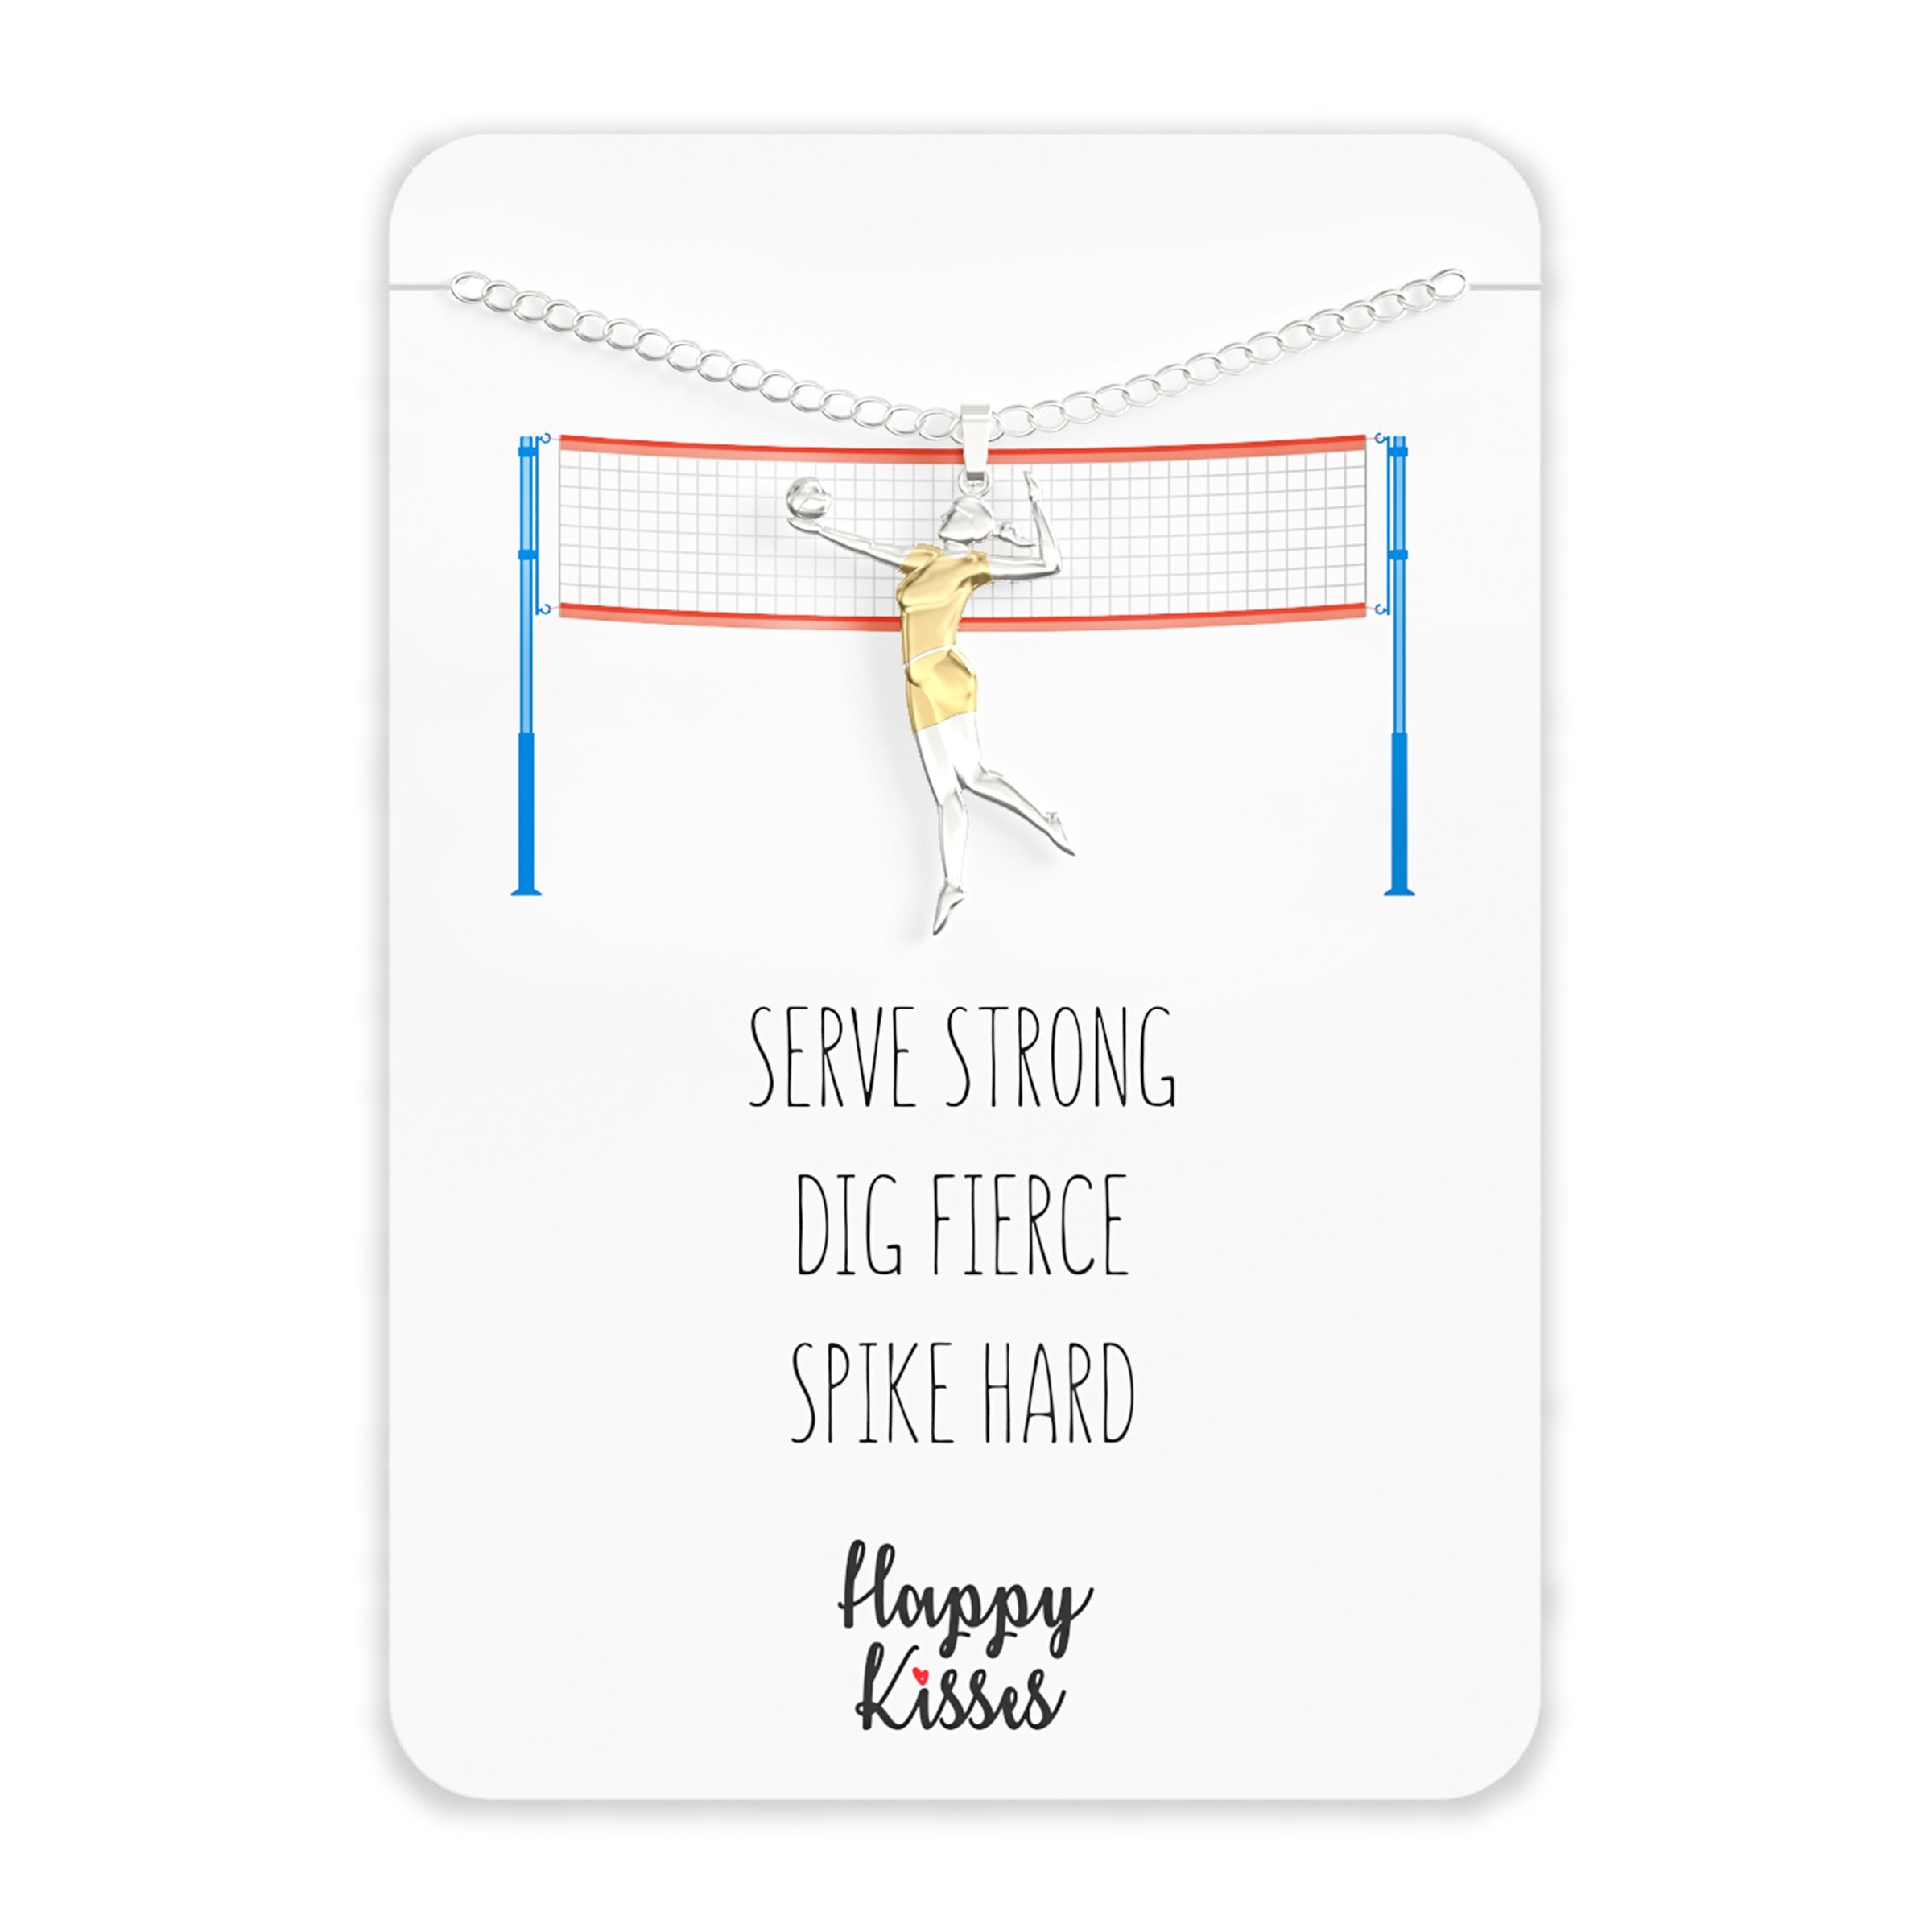 Volleyball Gift Necklace – Cute Volleyball Player Pendant Charm For Girls & Teens on a Volleyball Team – Inspirational Message Card – Happy Kisses